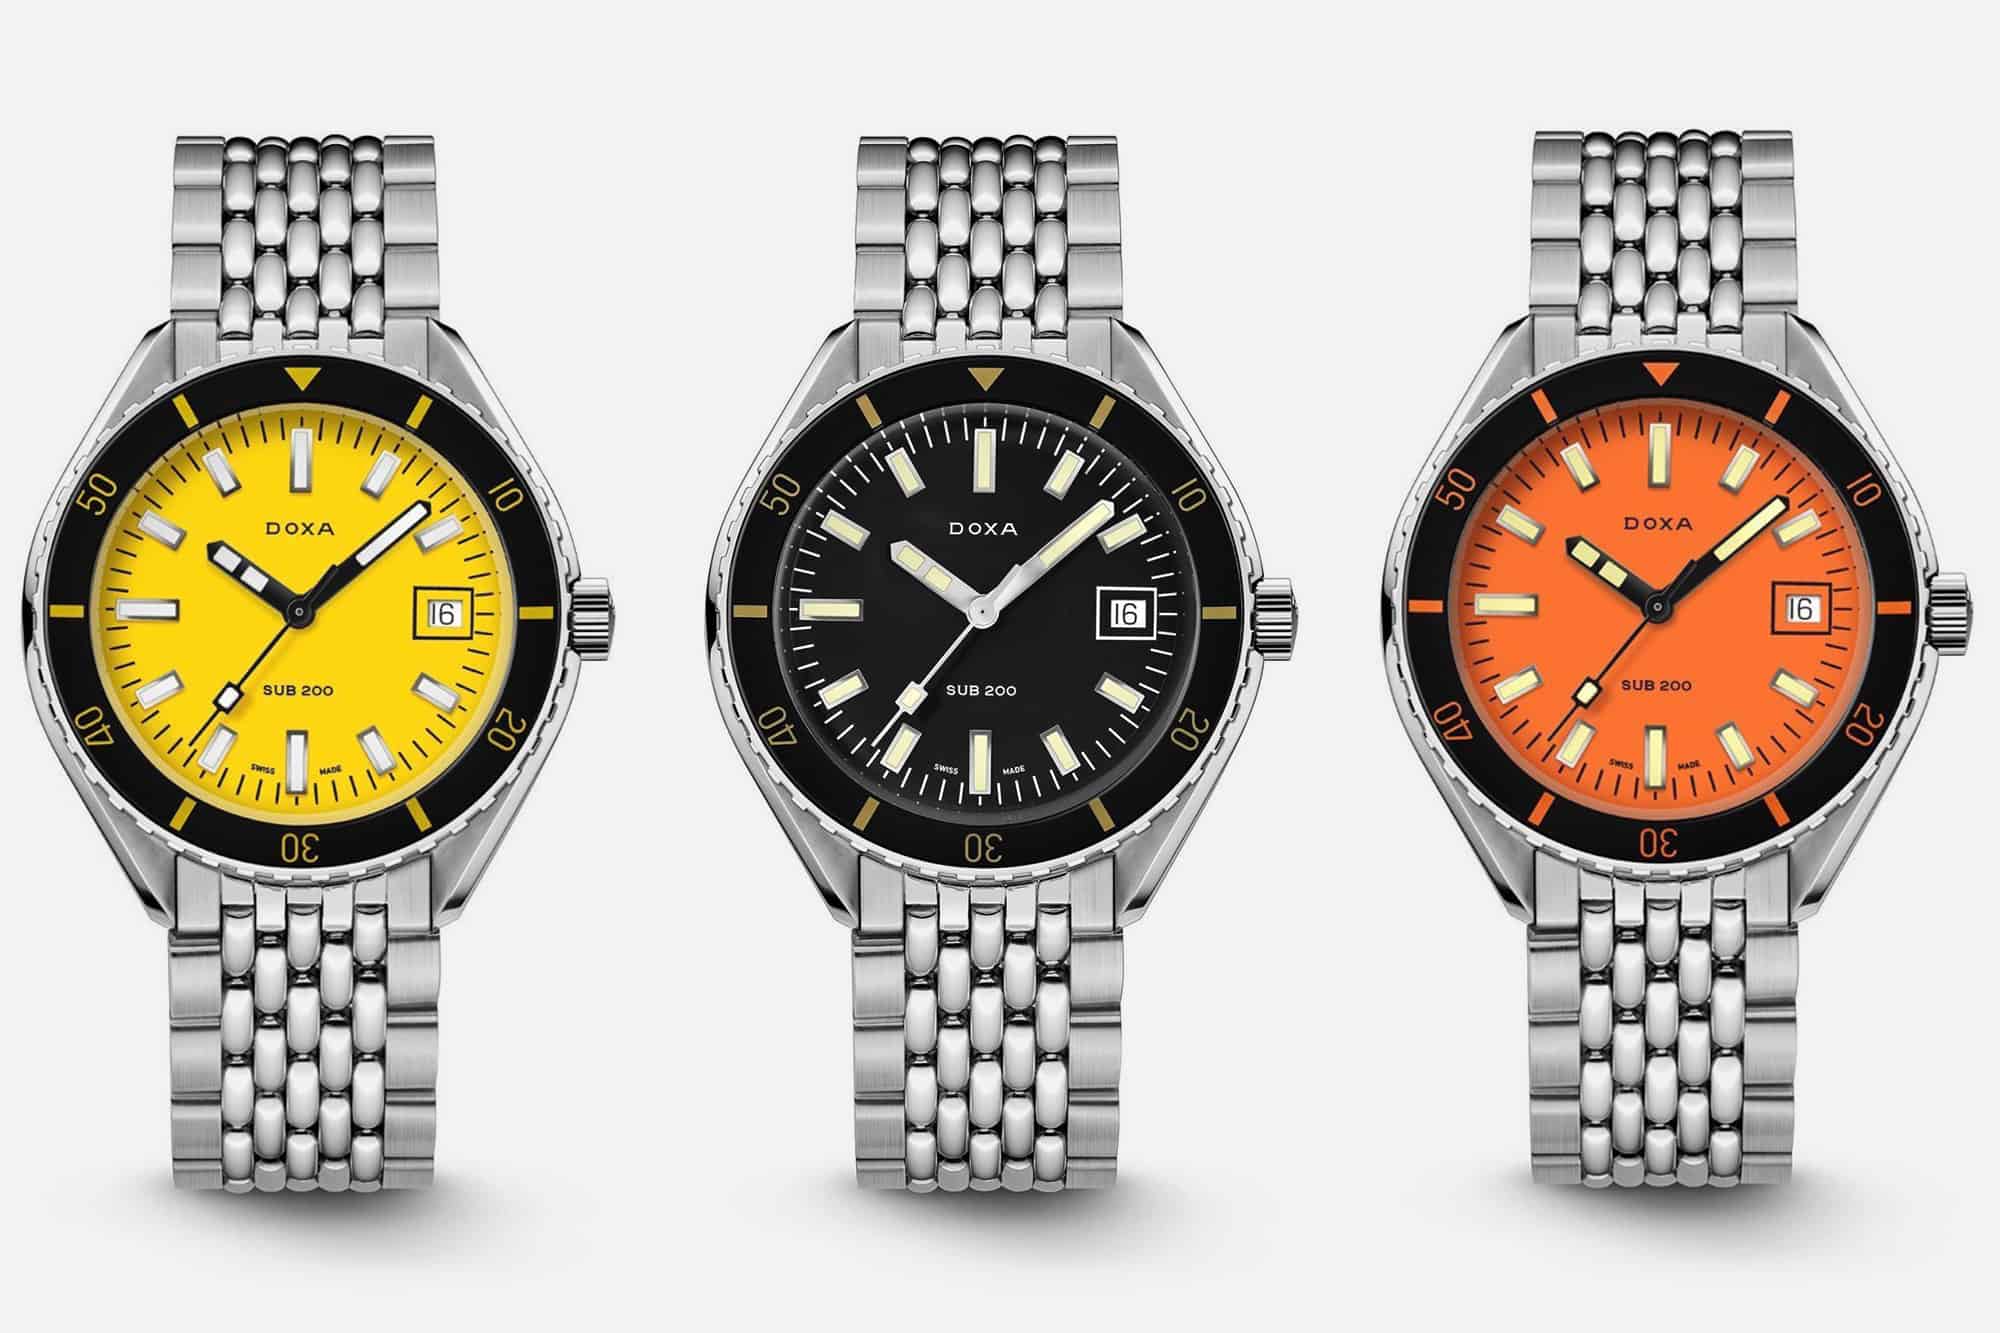 Introducing the new Doxa Sub 200 Collection